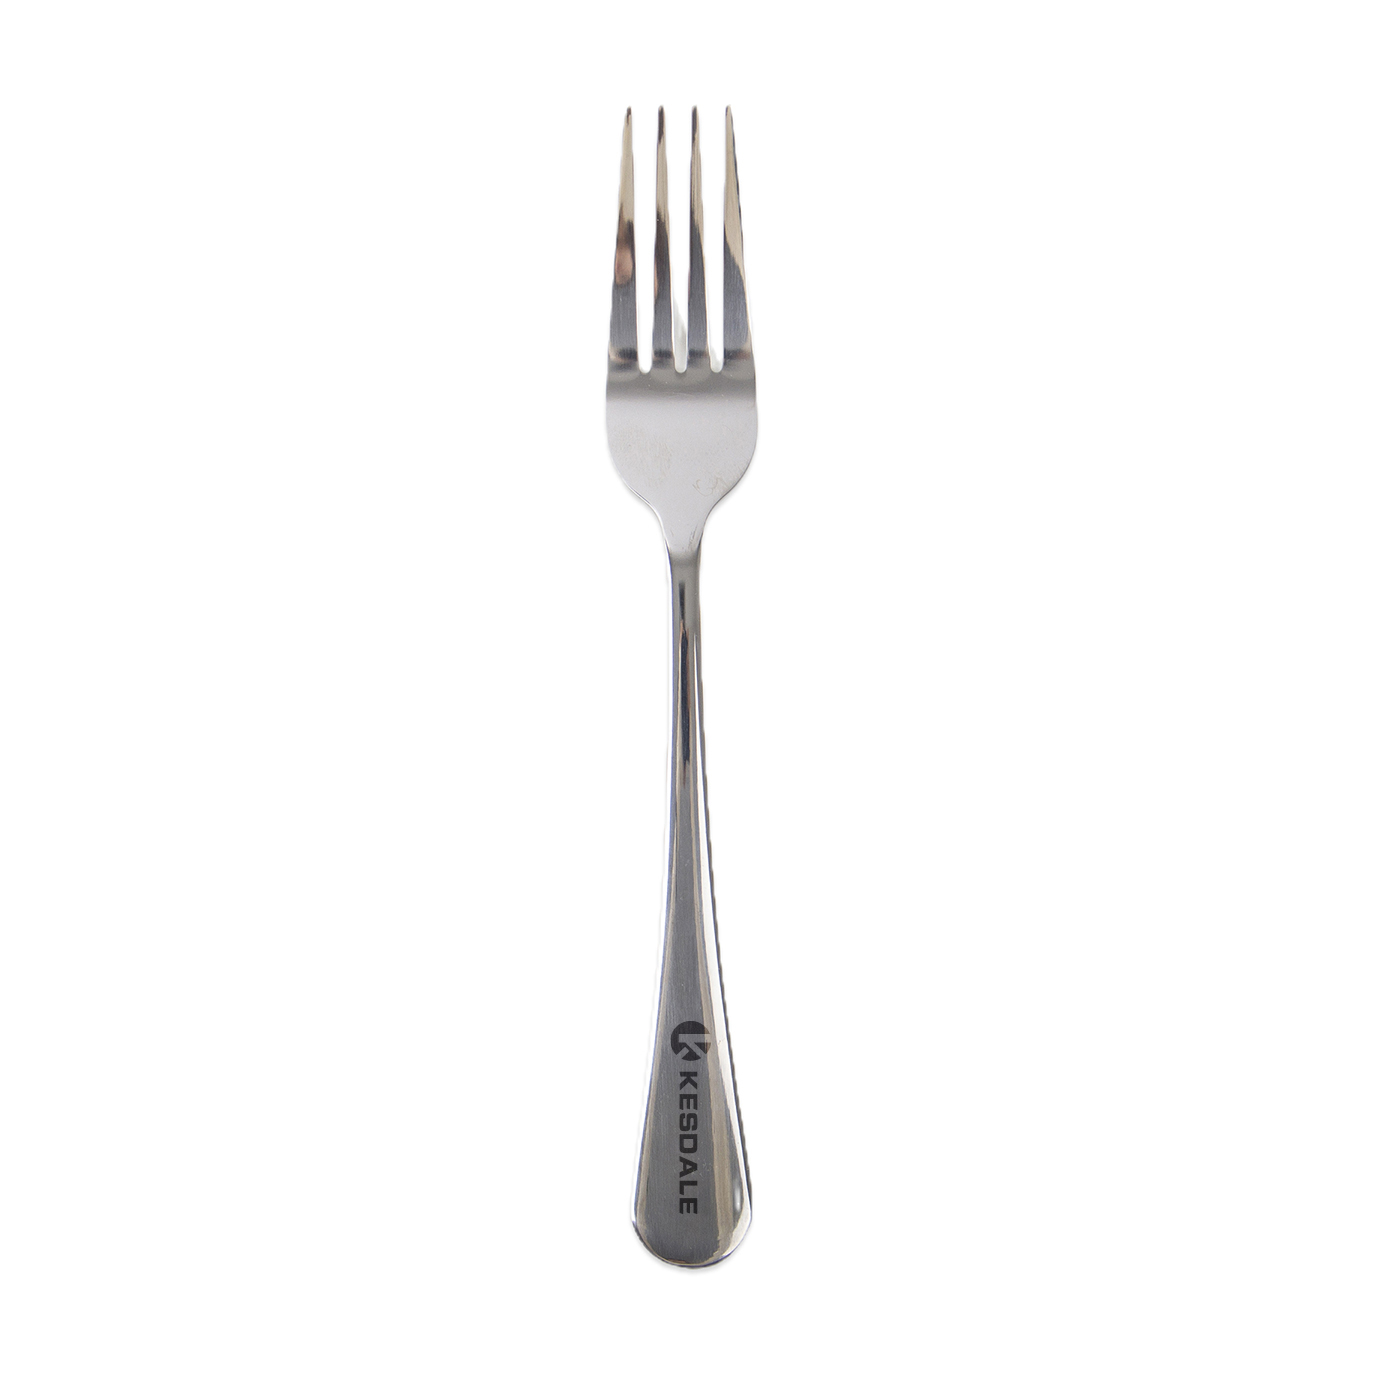 Stainless Steel Table Fork